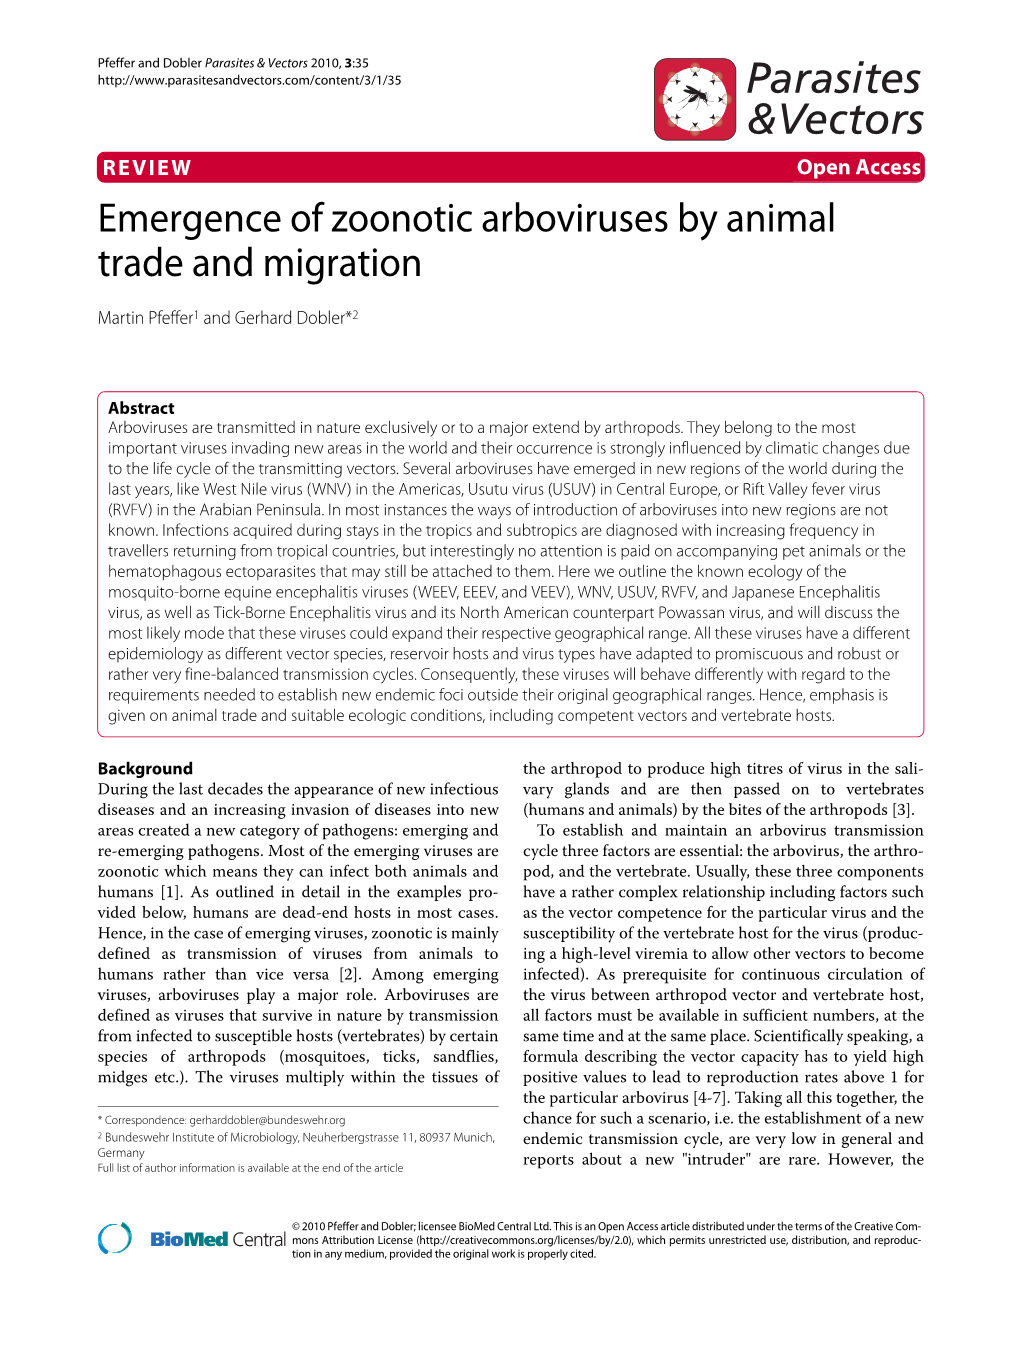 Emergence of Zoonotic Arboviruses by Animal Trade and Migration Parasites & Vectors 2010, 3:35